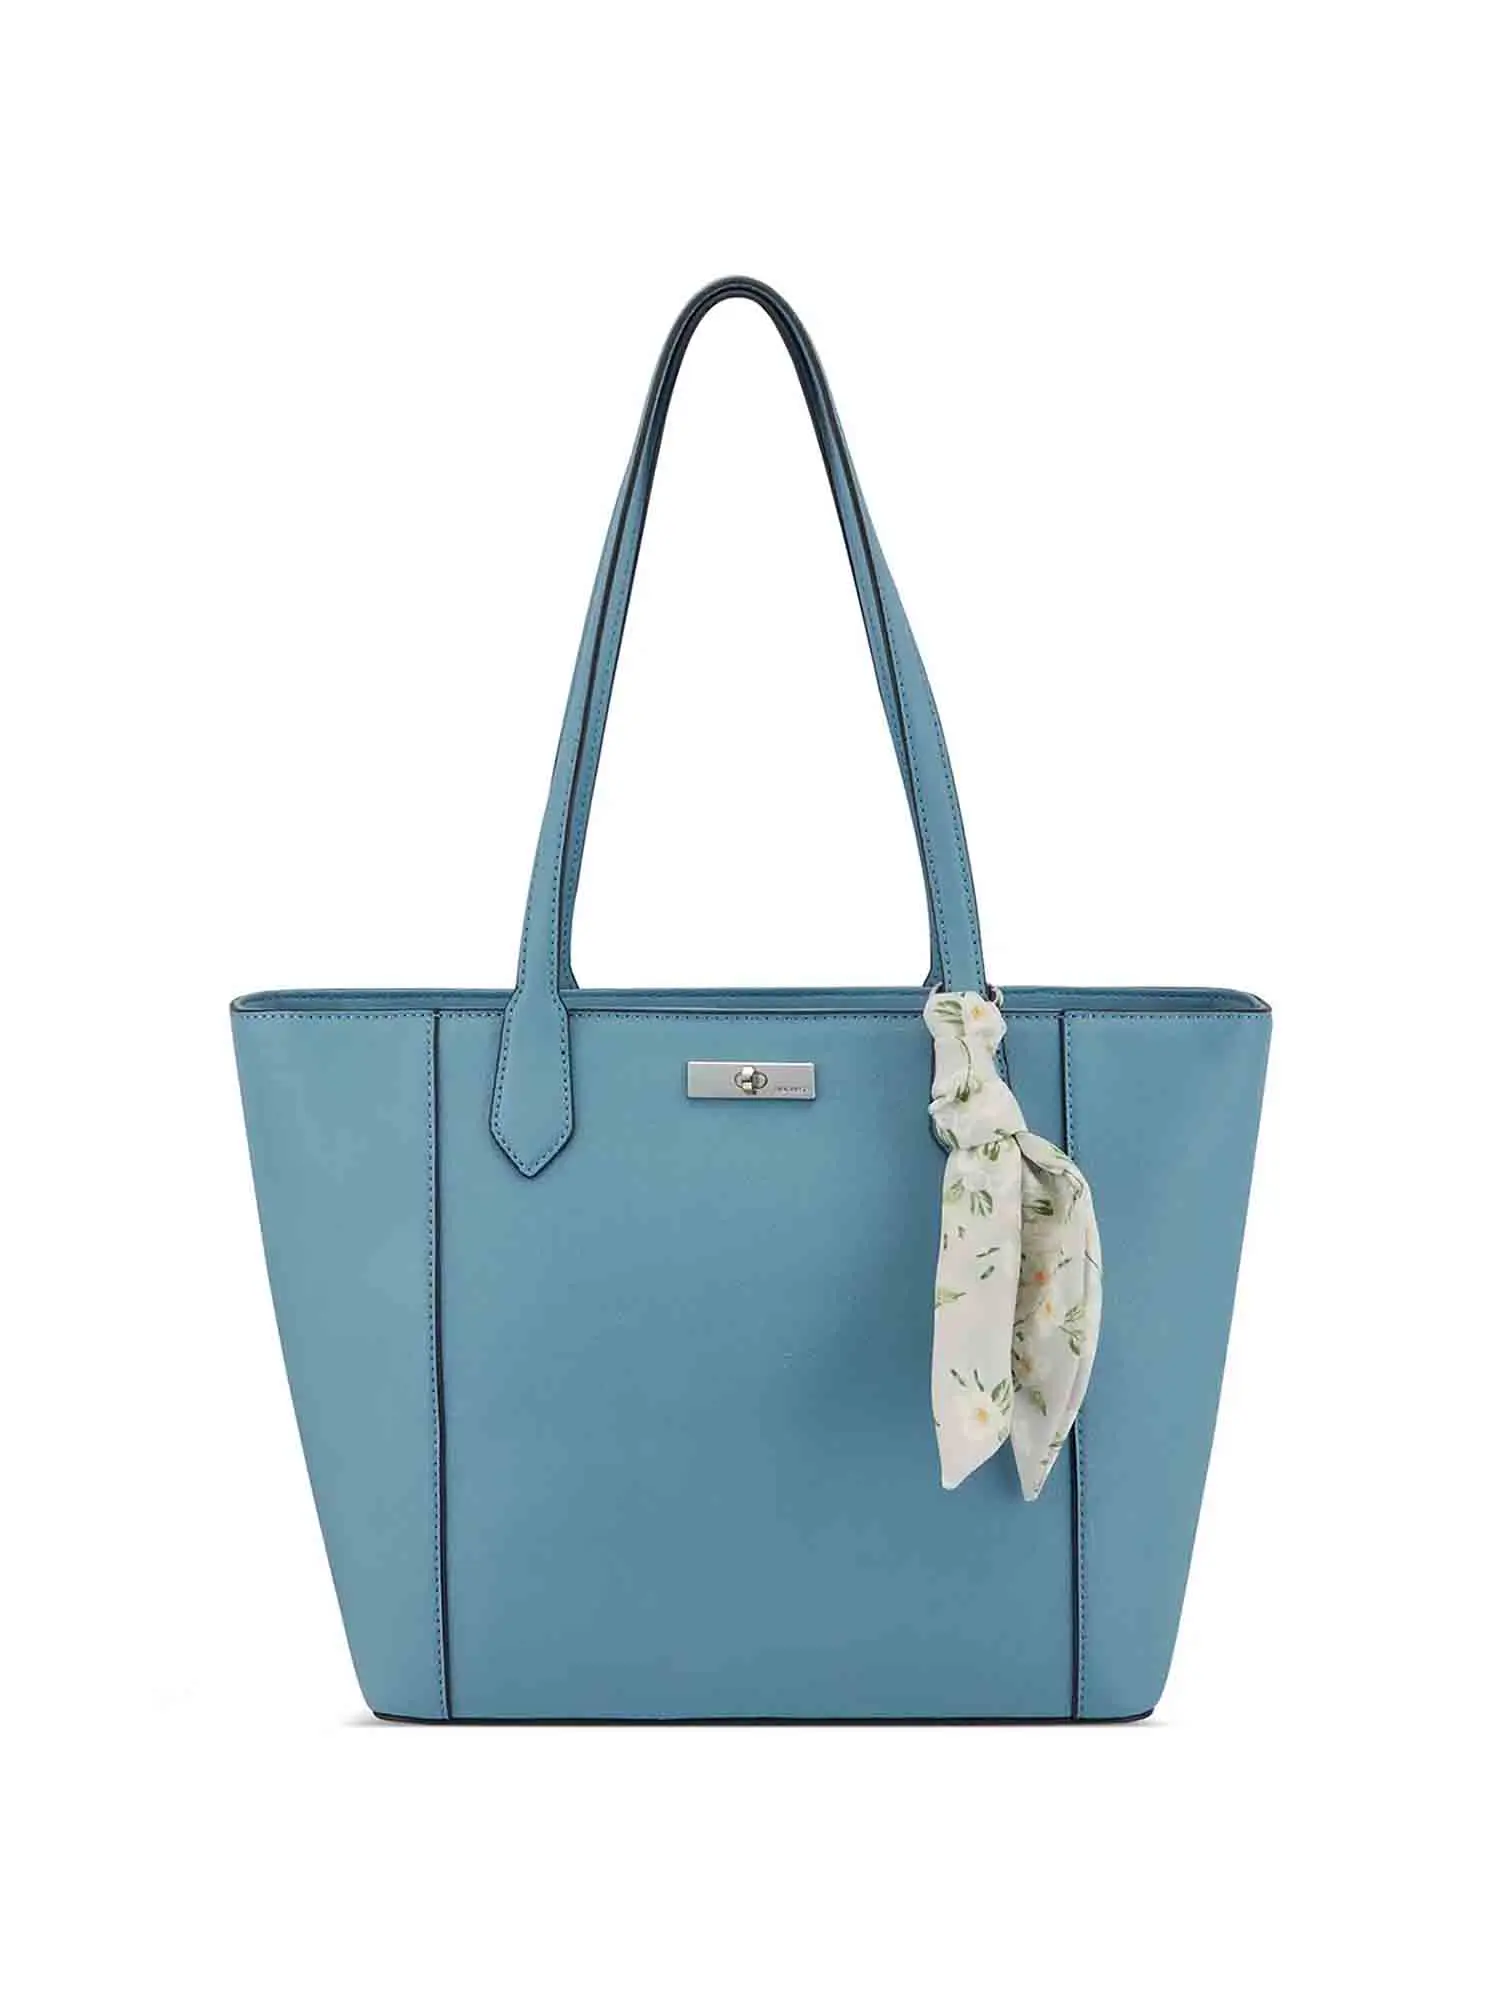 TOTE DONNA - NINE WEST - 101510604 S09 - JEANS, UNICA